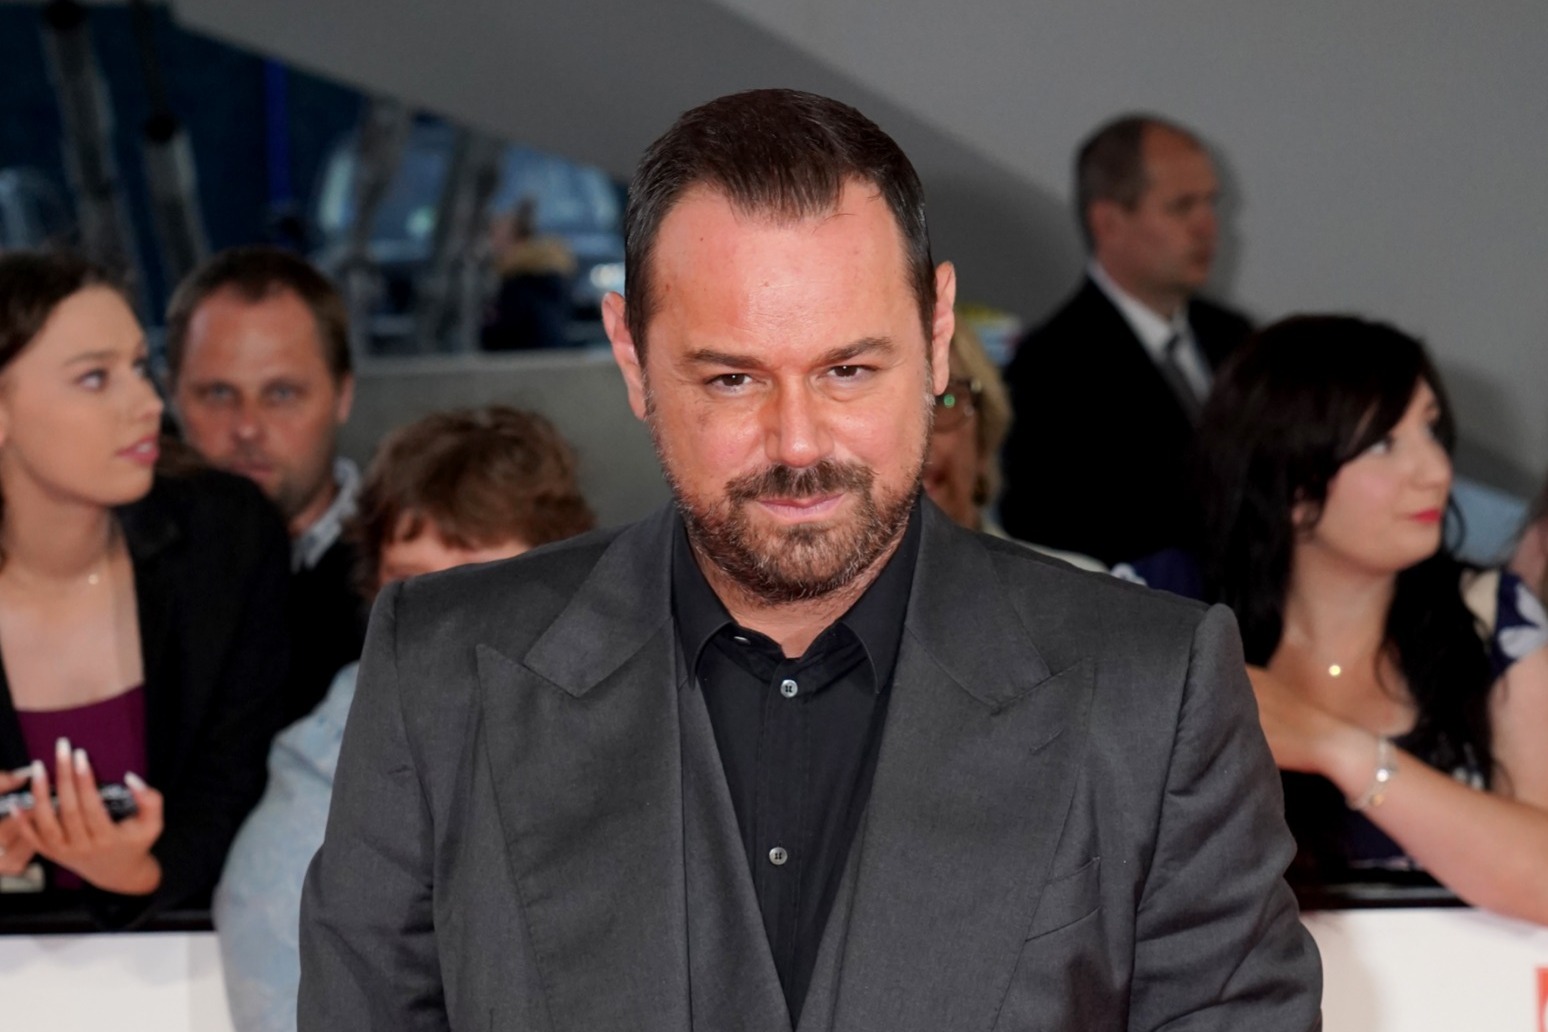 Danny Dyer to quit EastEnders later this year, soap confirms 